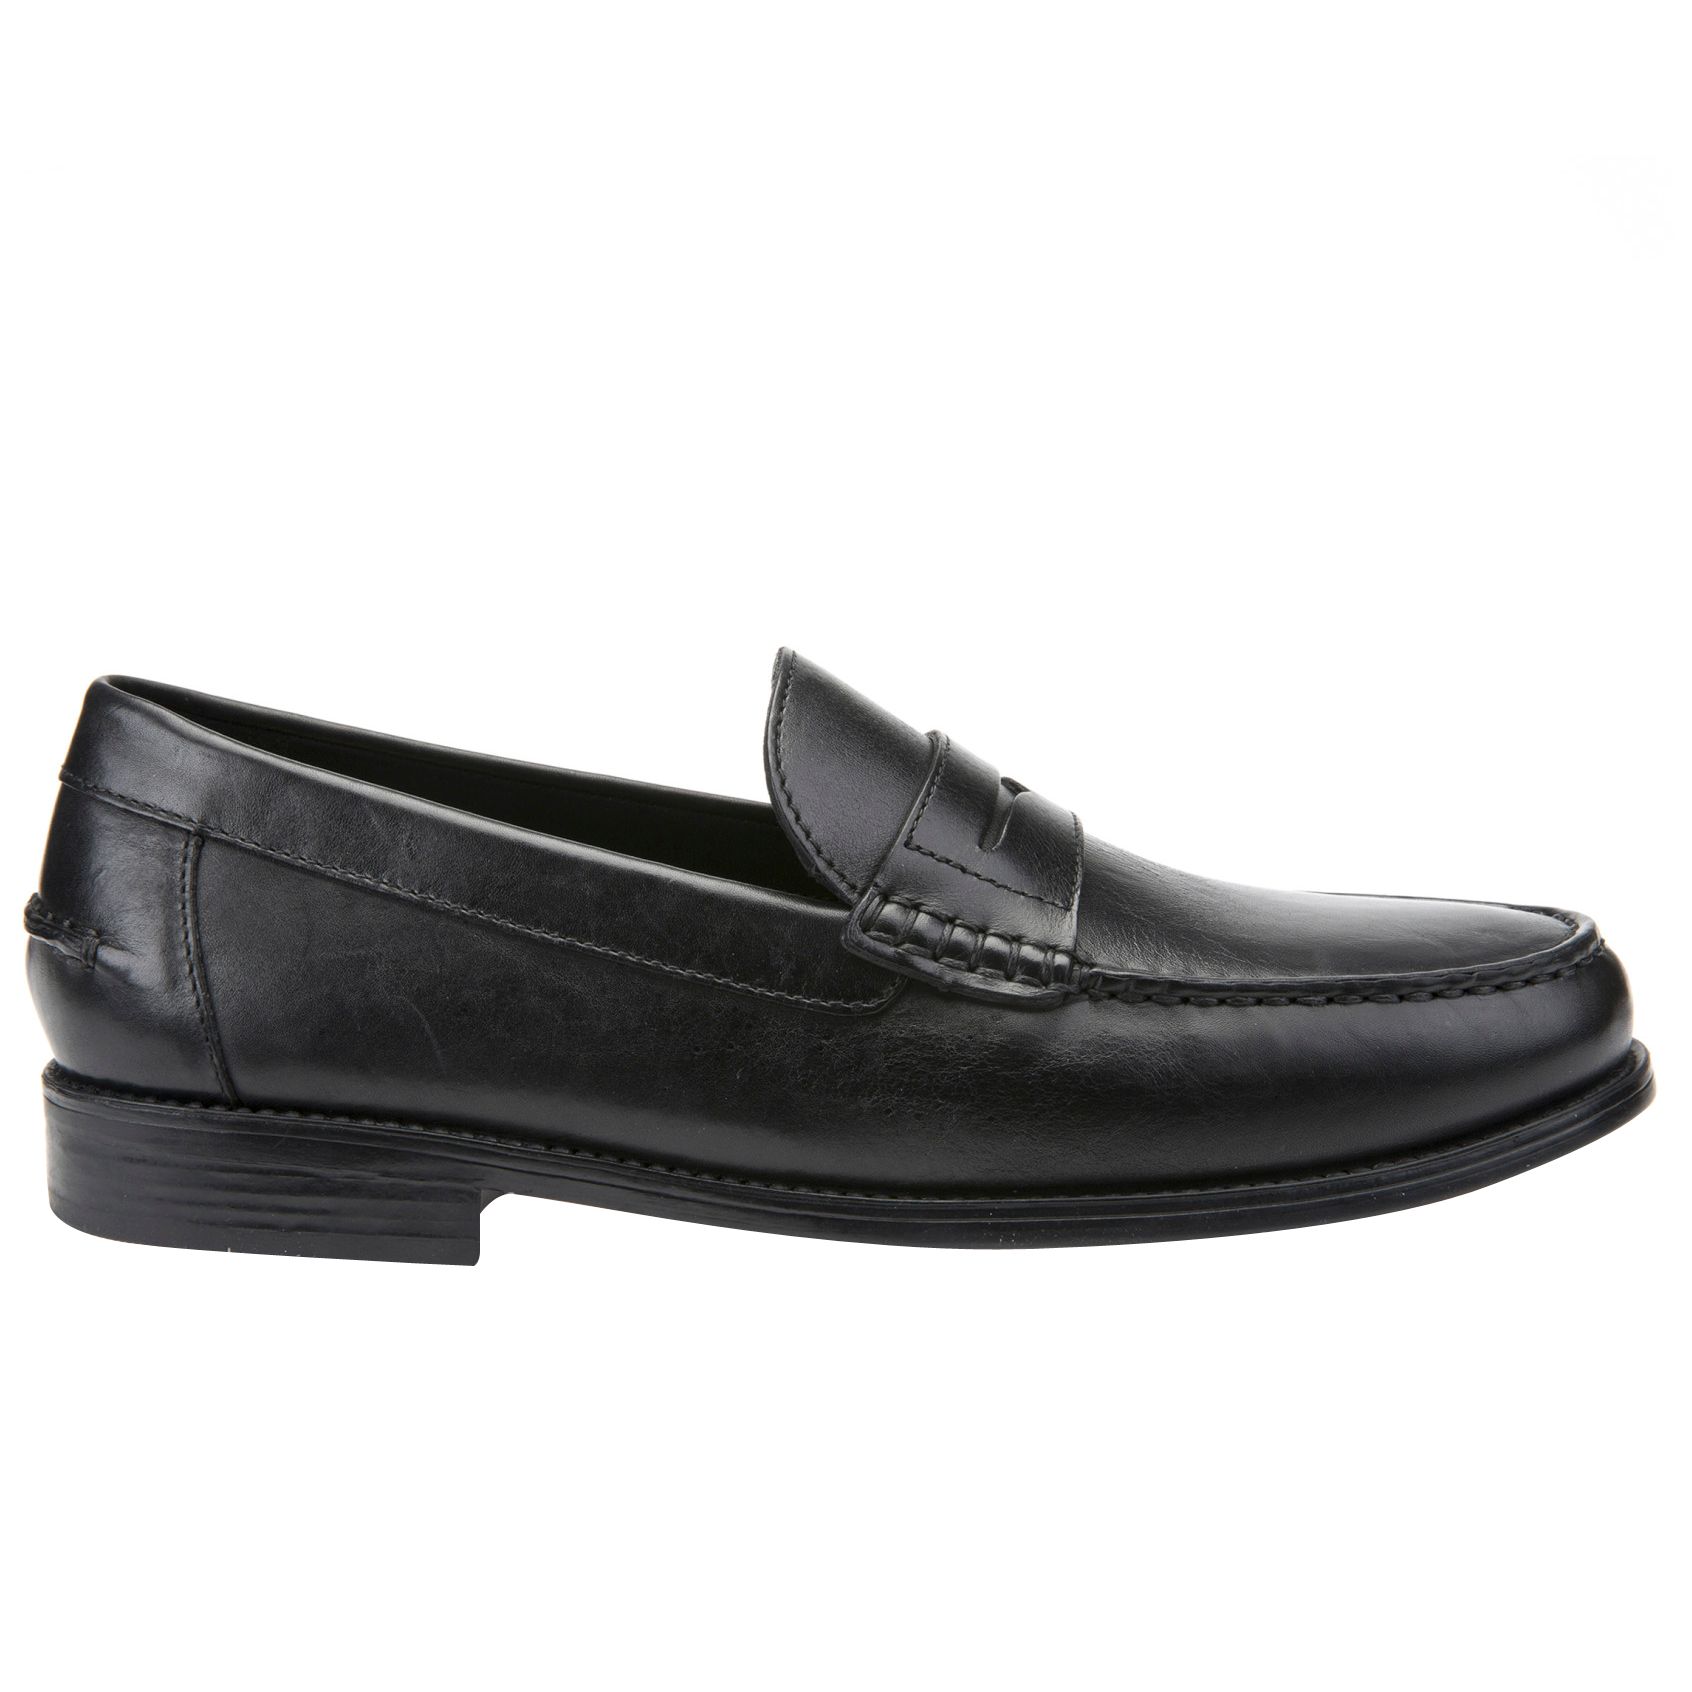 Geox New Damon Moccasins Shoes, Black